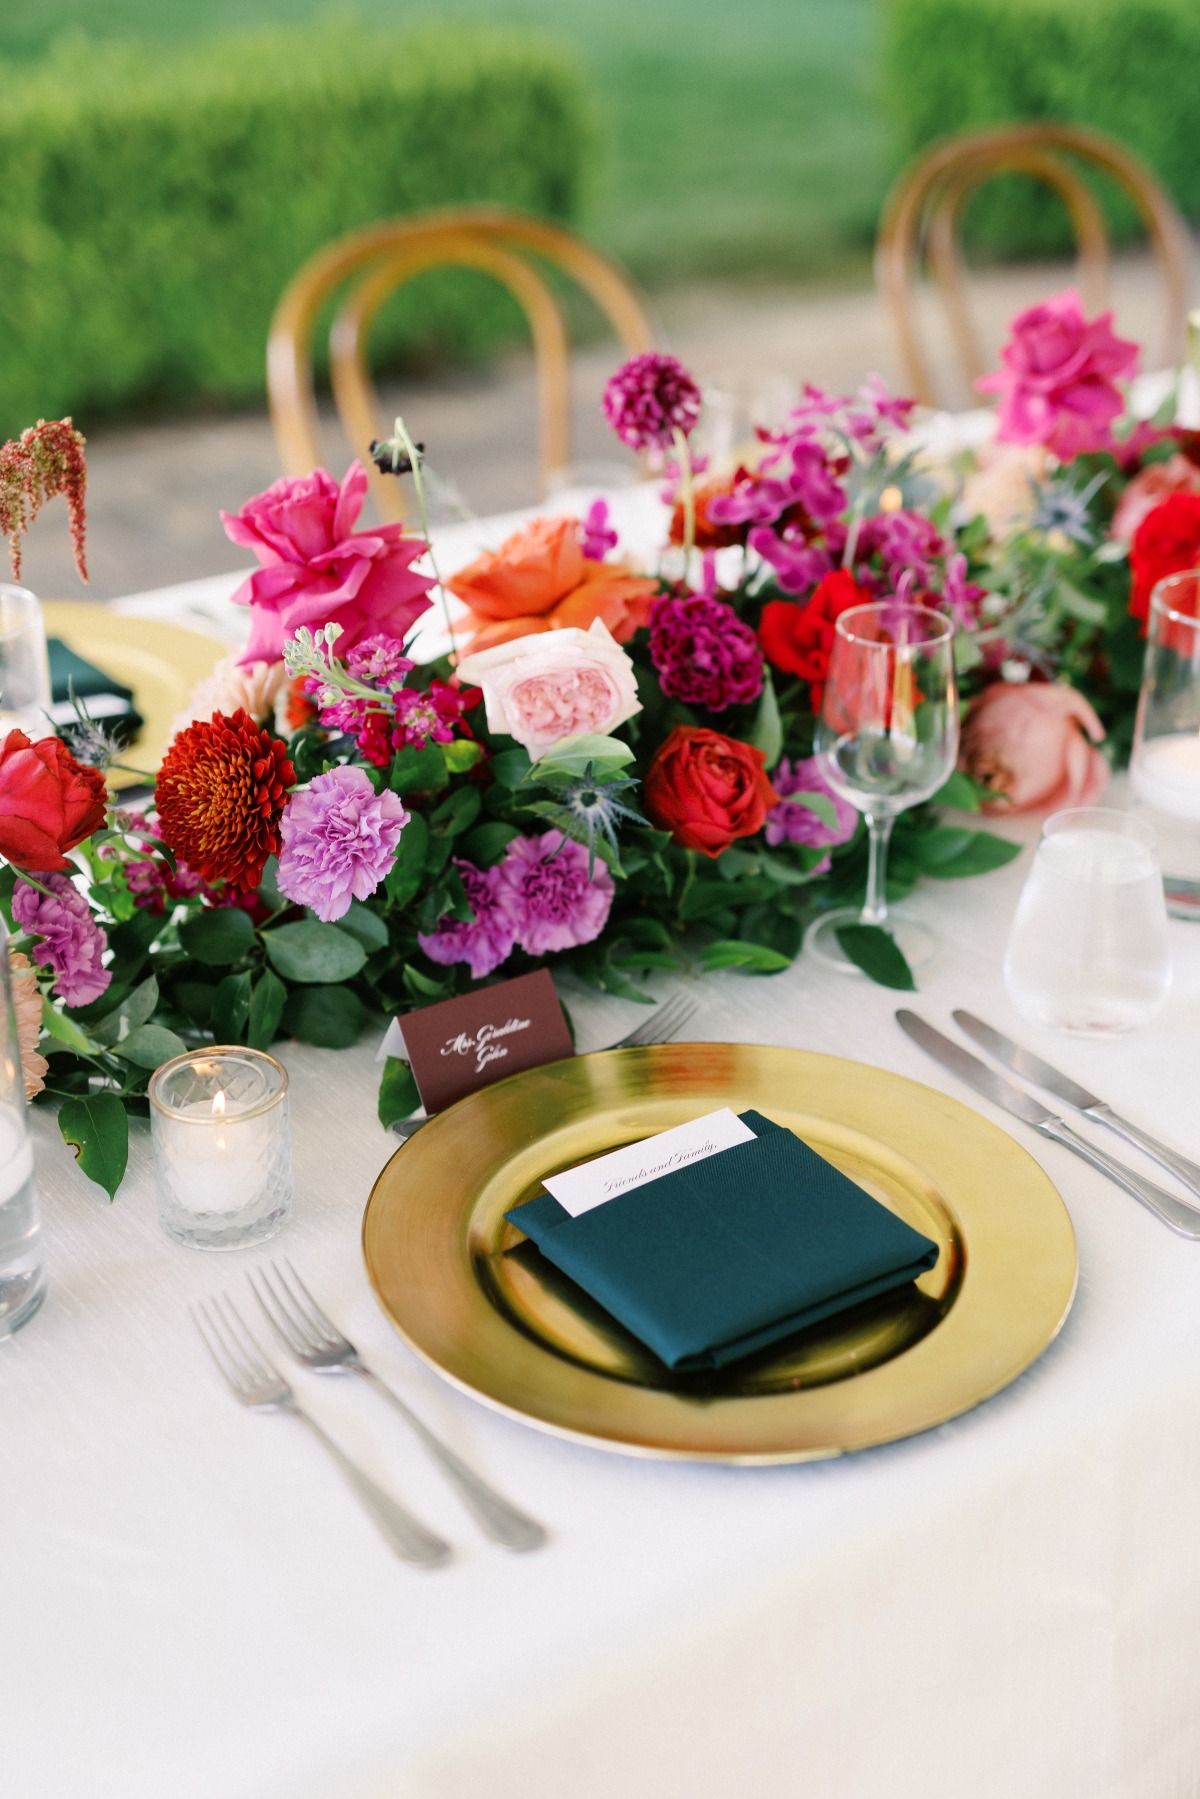 Close-up of place setting and table runner flowers